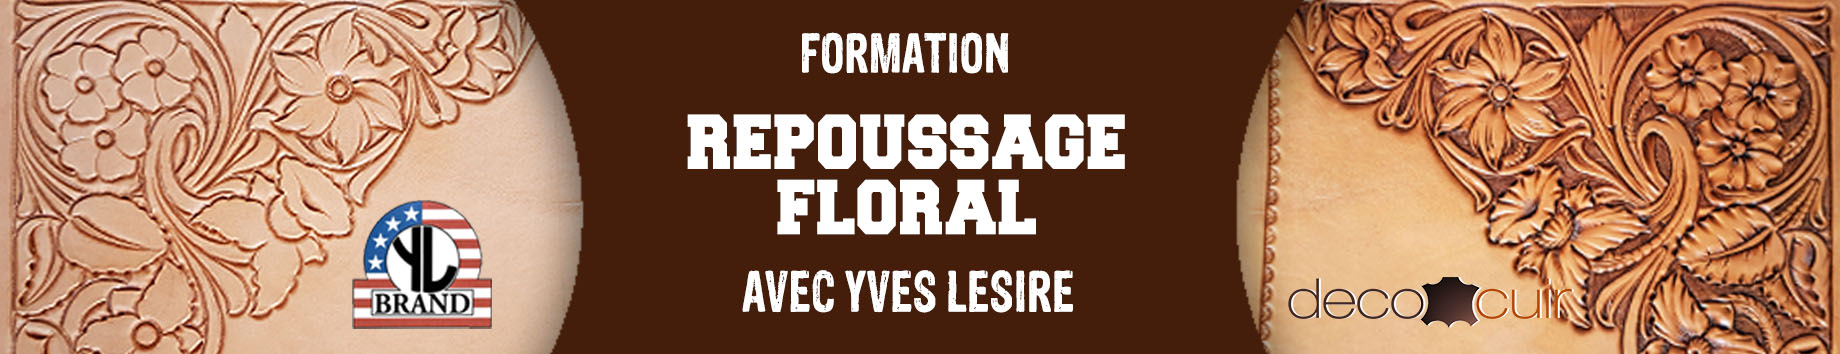 formation repoussage cuir